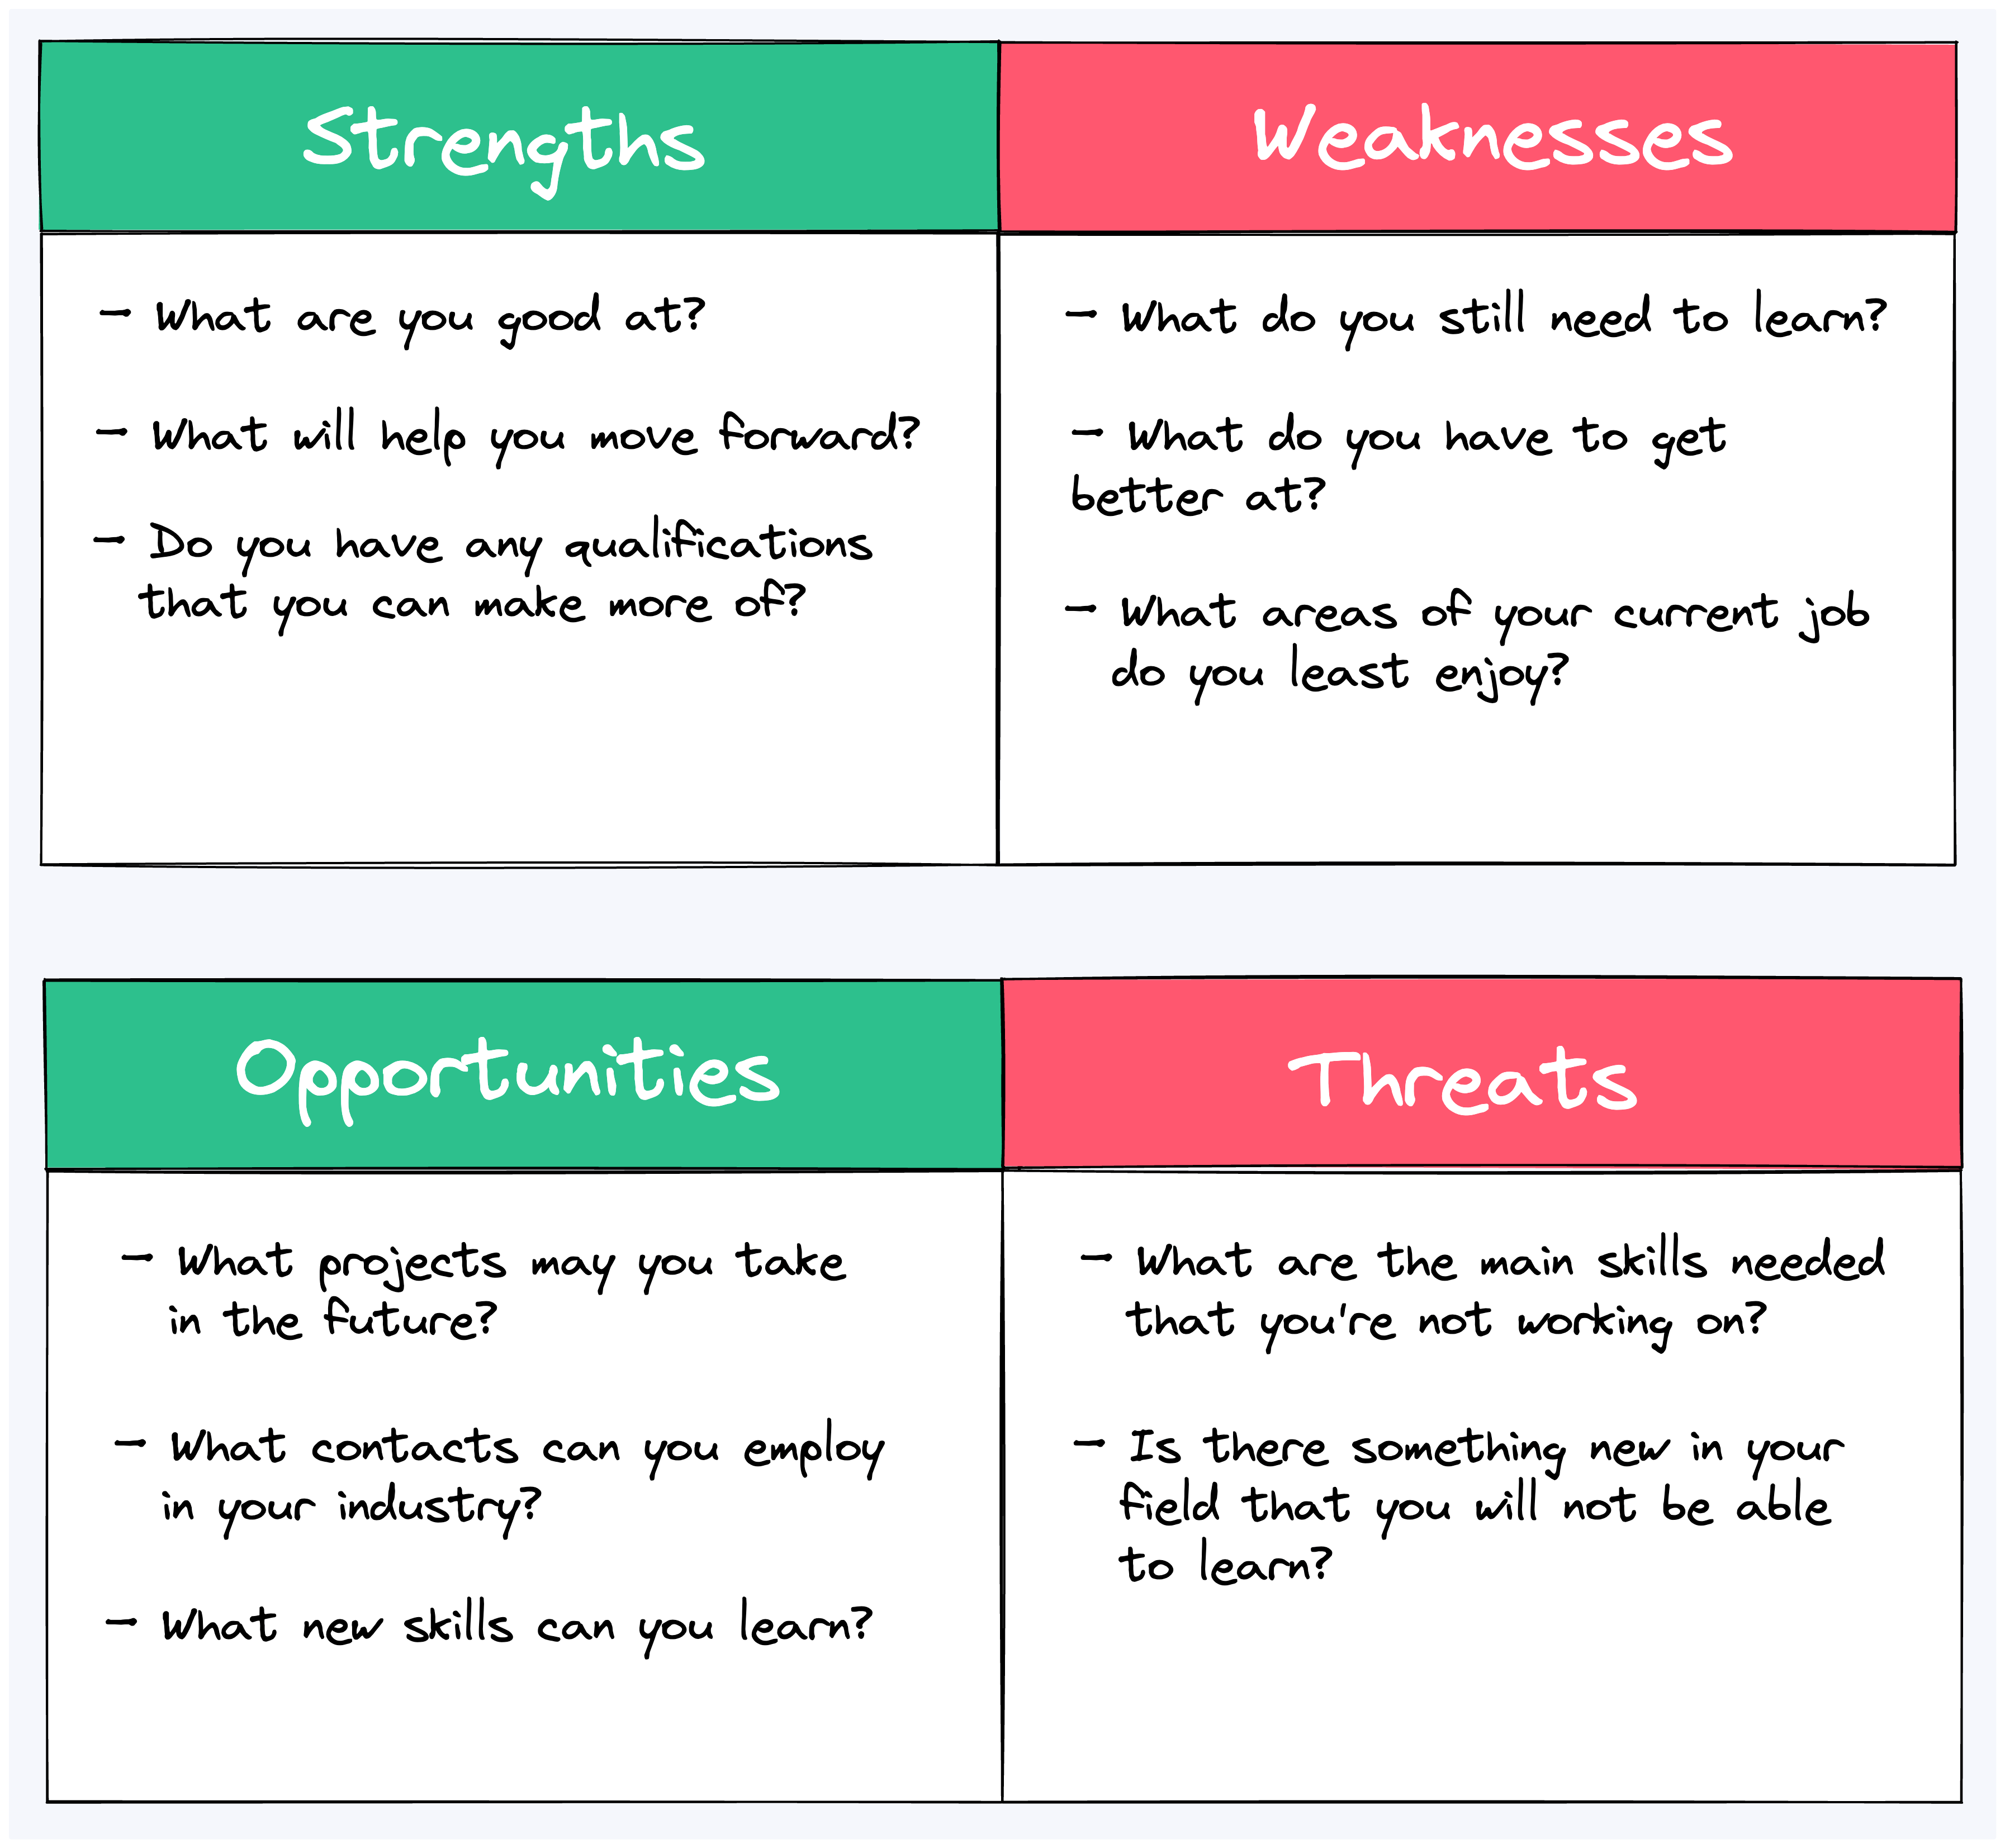 personal swot analysis (1) (1).png